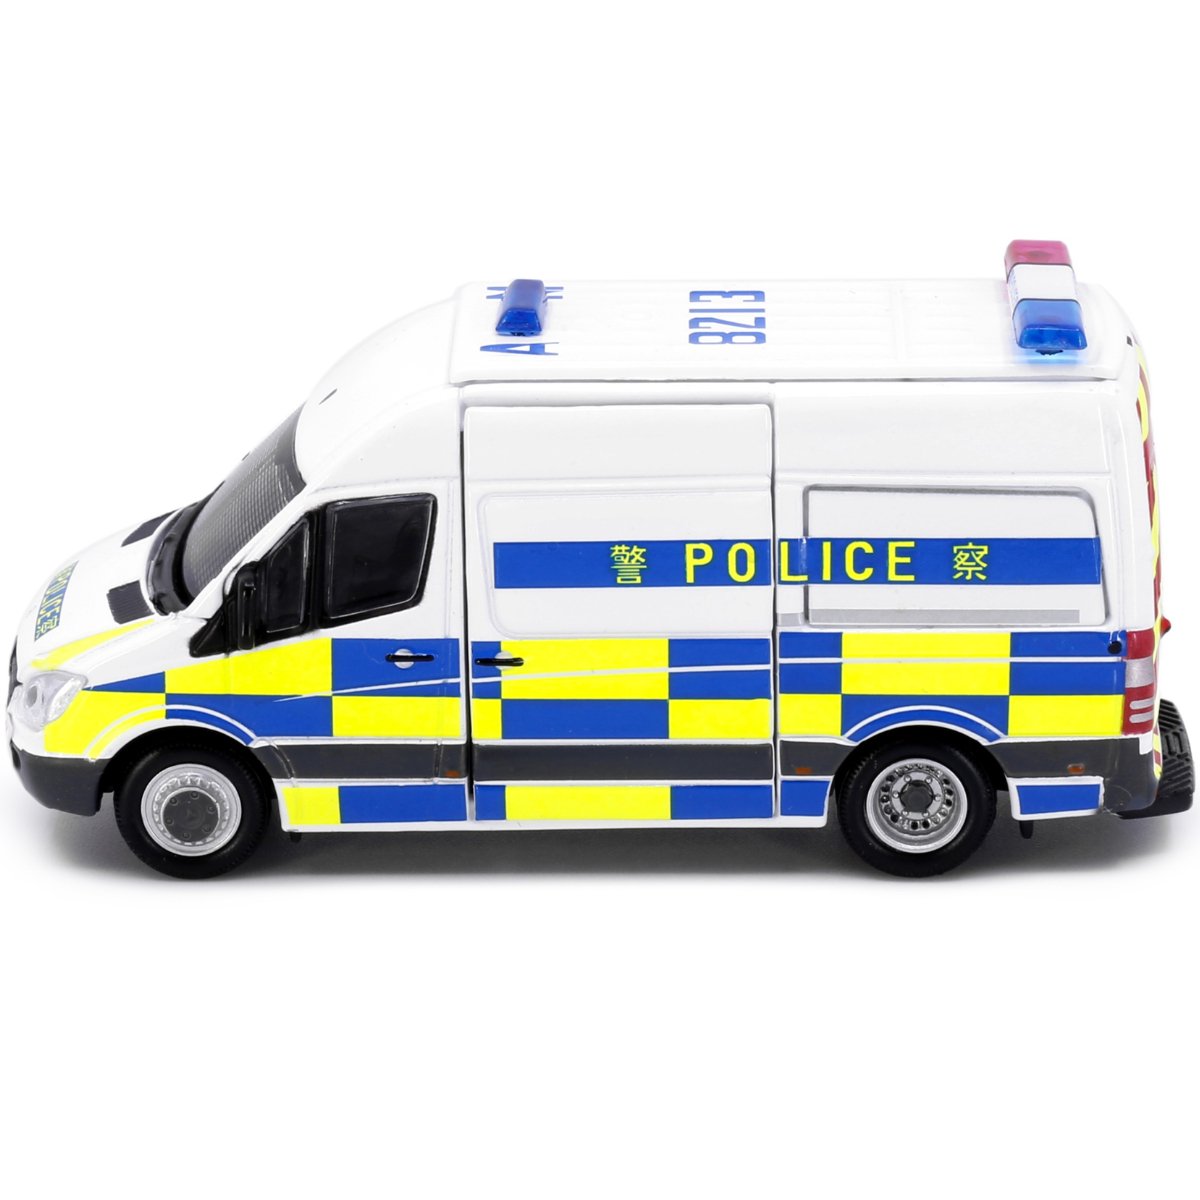 Tiny Models Mercedes-Benz Sprinter High Roof Police - Traffic (1:76 Scale) - Phillips Hobbies